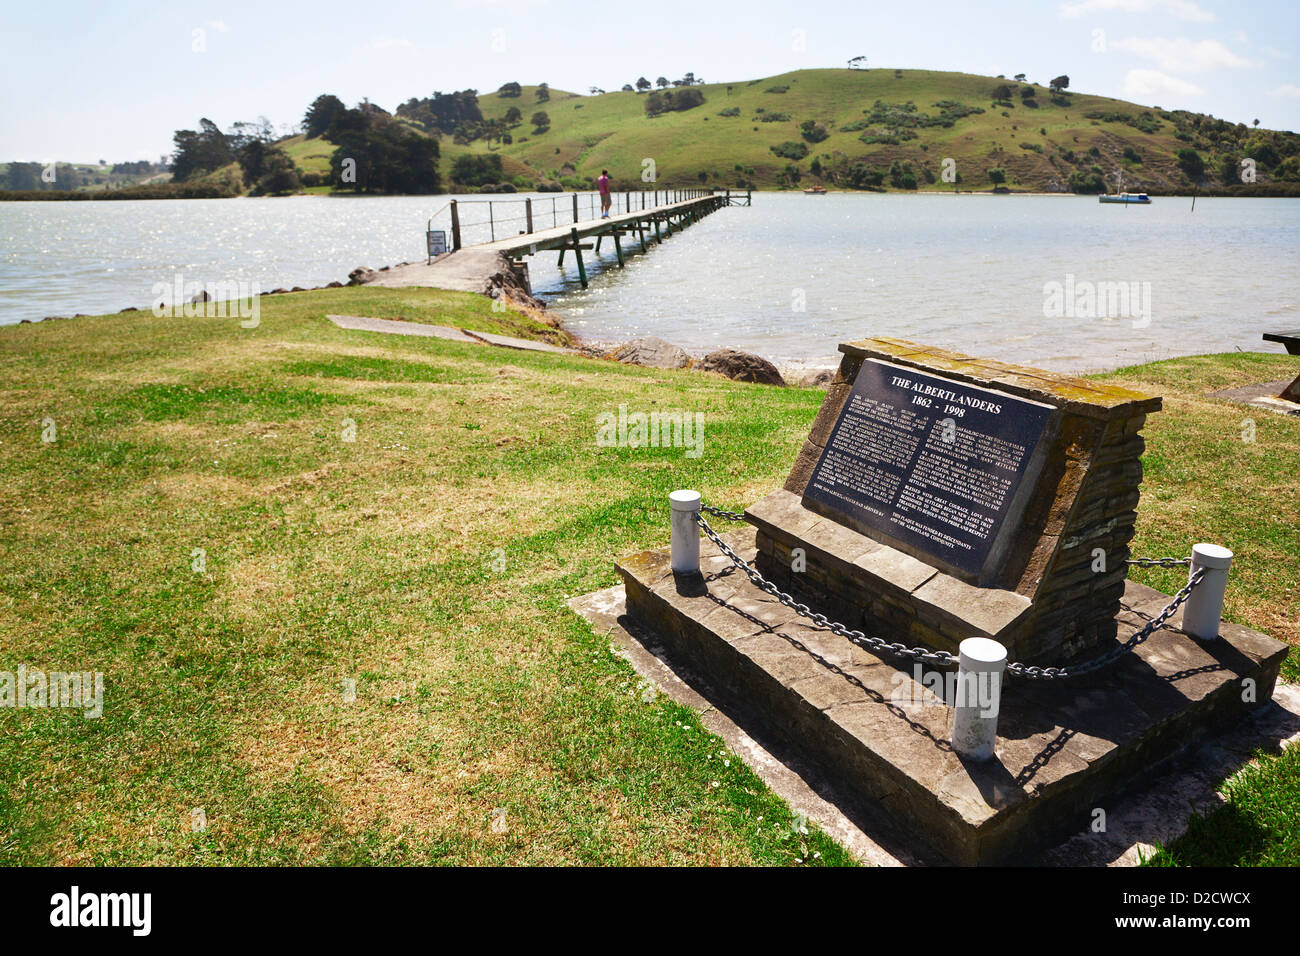 The wharf at Port Albert and a commemorative plaque for the pioneers, Albertlanders. Wellsford, North Island, New Zealand. Stock Photo